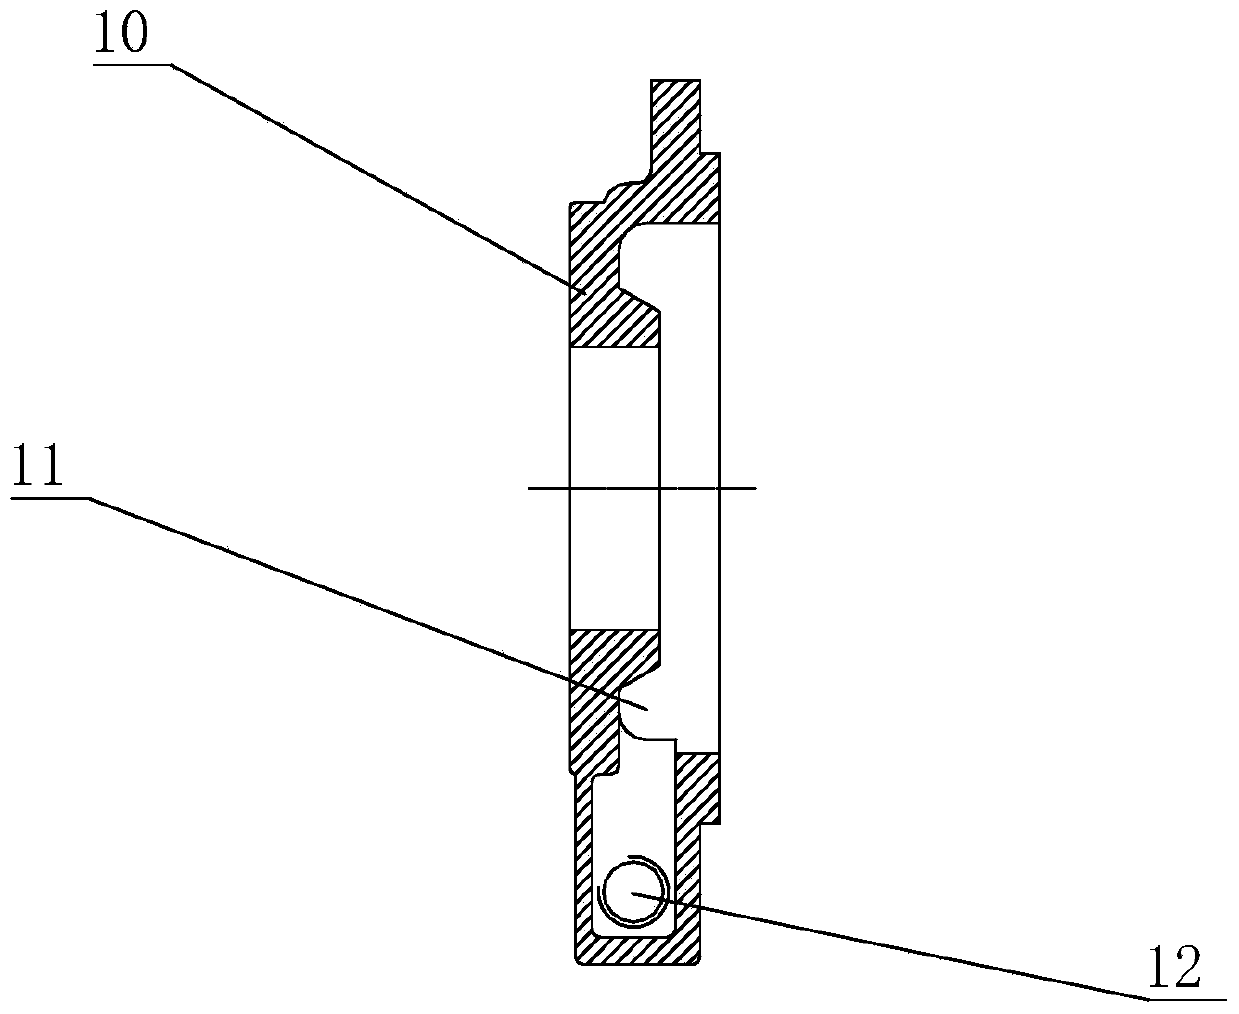 Outer bearing cover structure